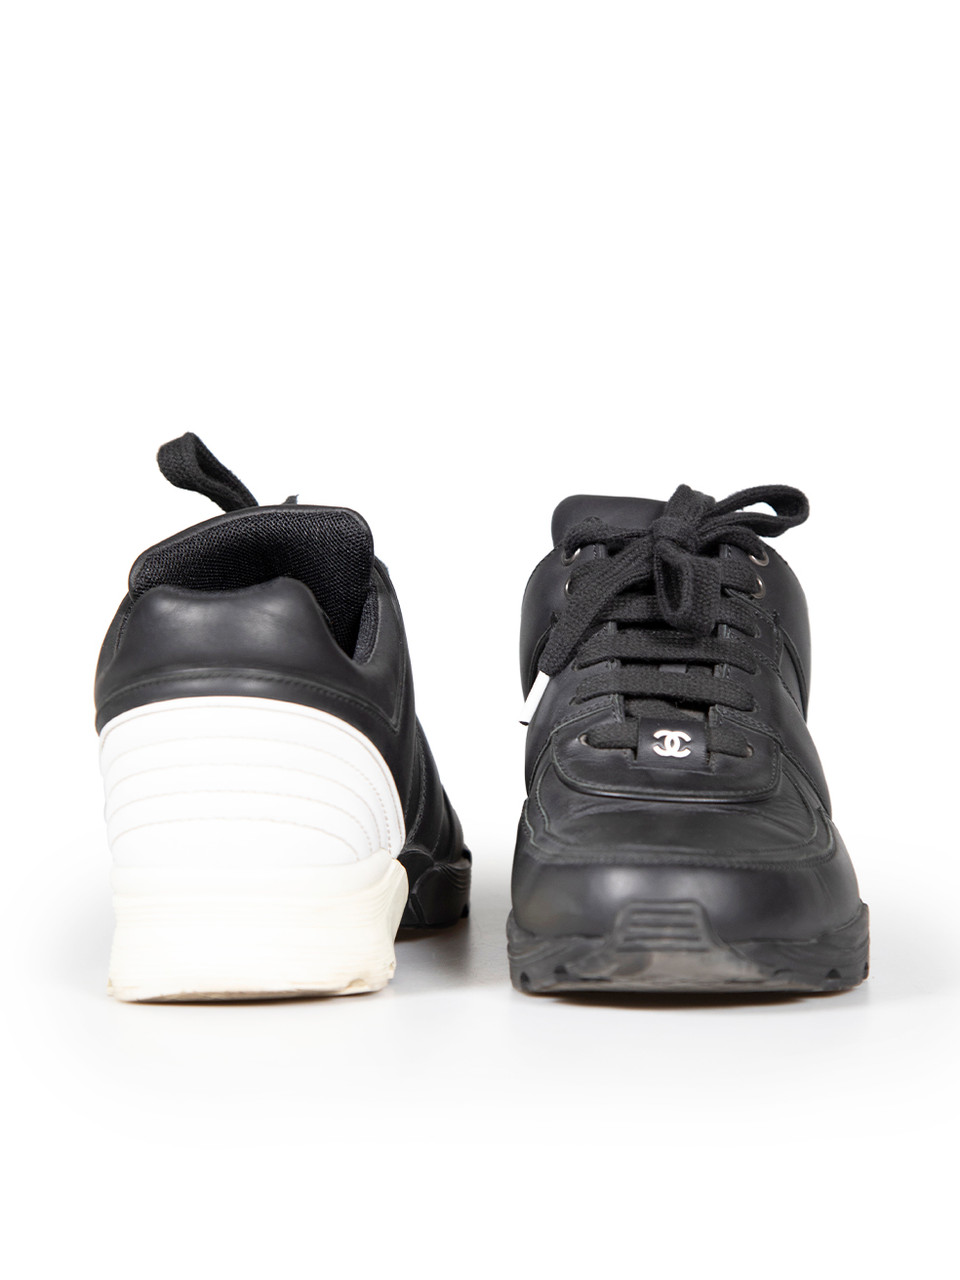 Chanel Black Leather CC Logo Trainers